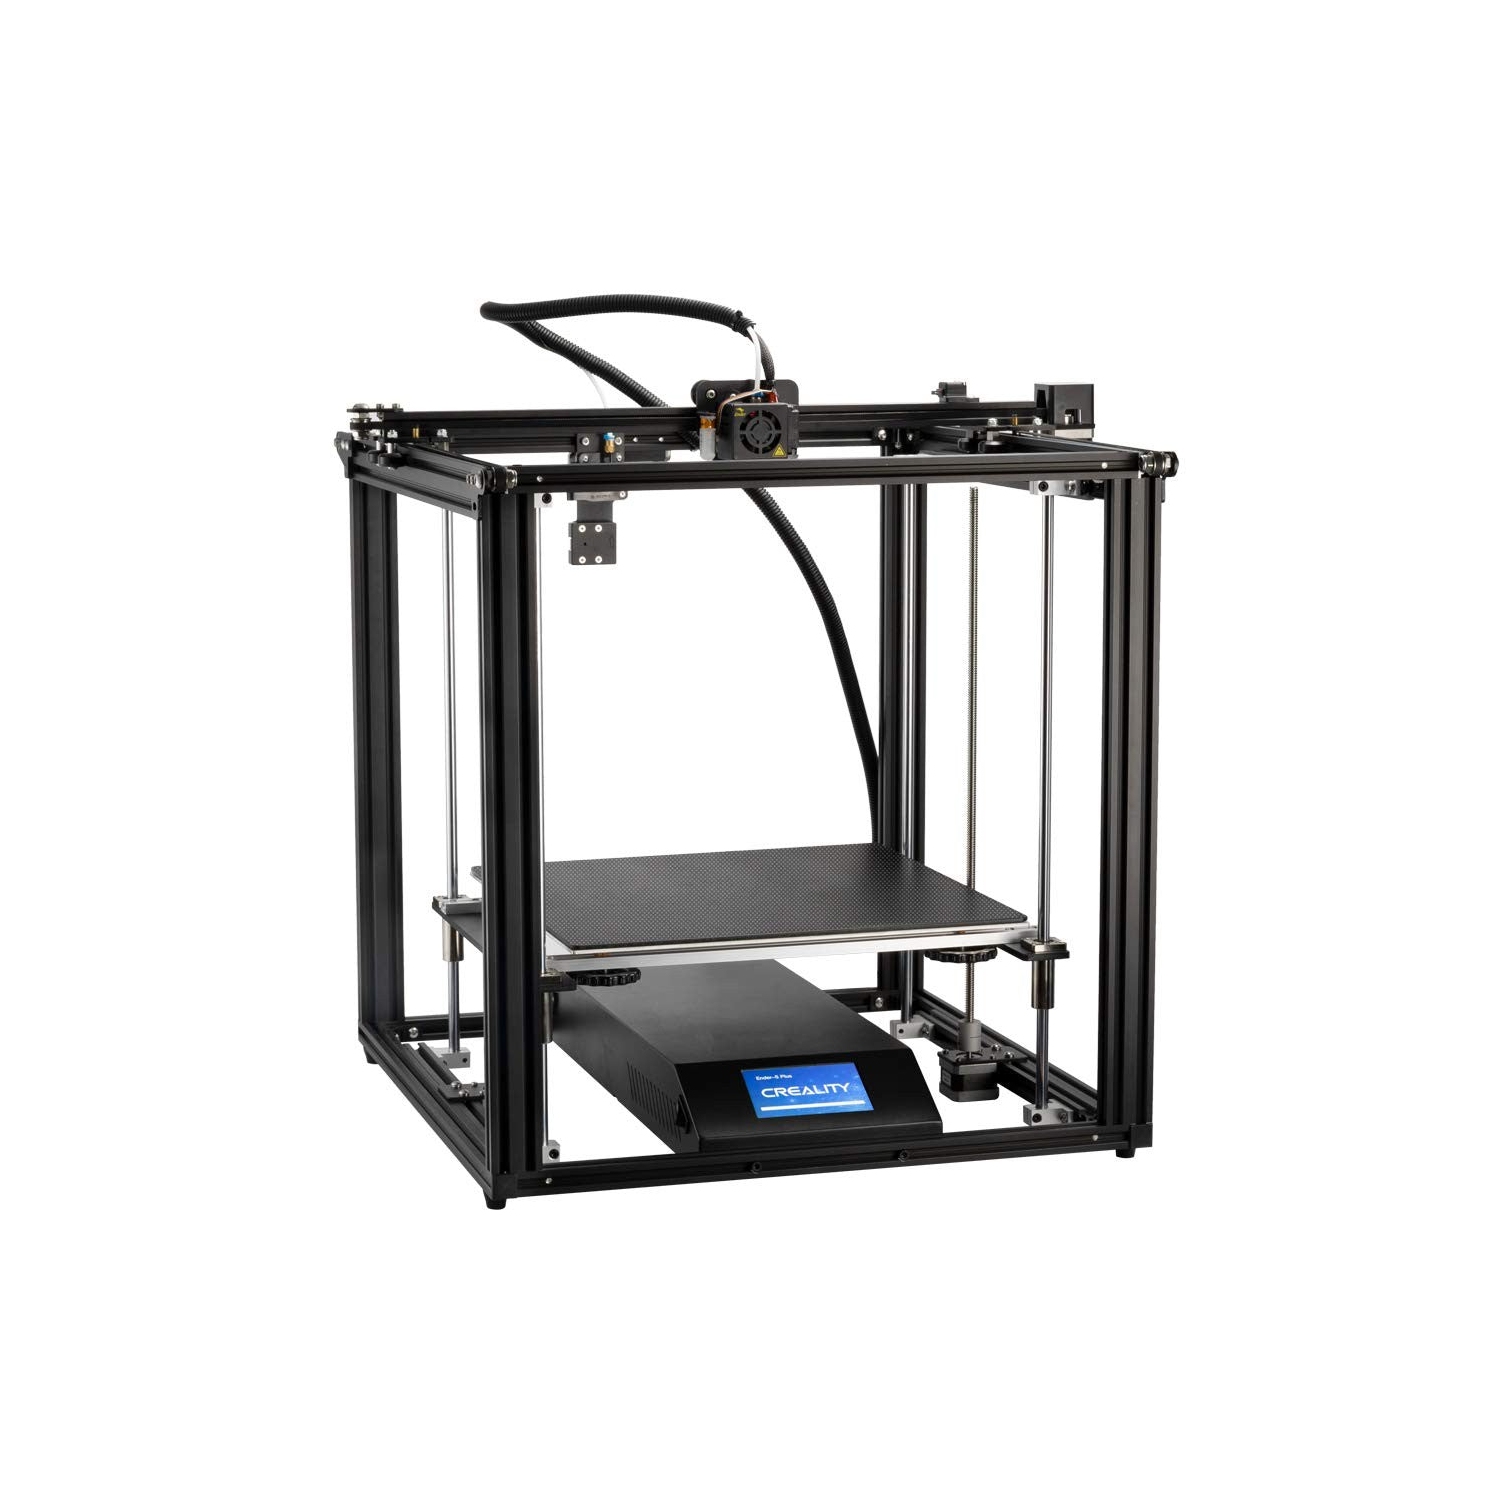 Creality Ender-5 S1 FDM Large Scale 3D Printer with Auto-Leveling and Faster Printing Speed